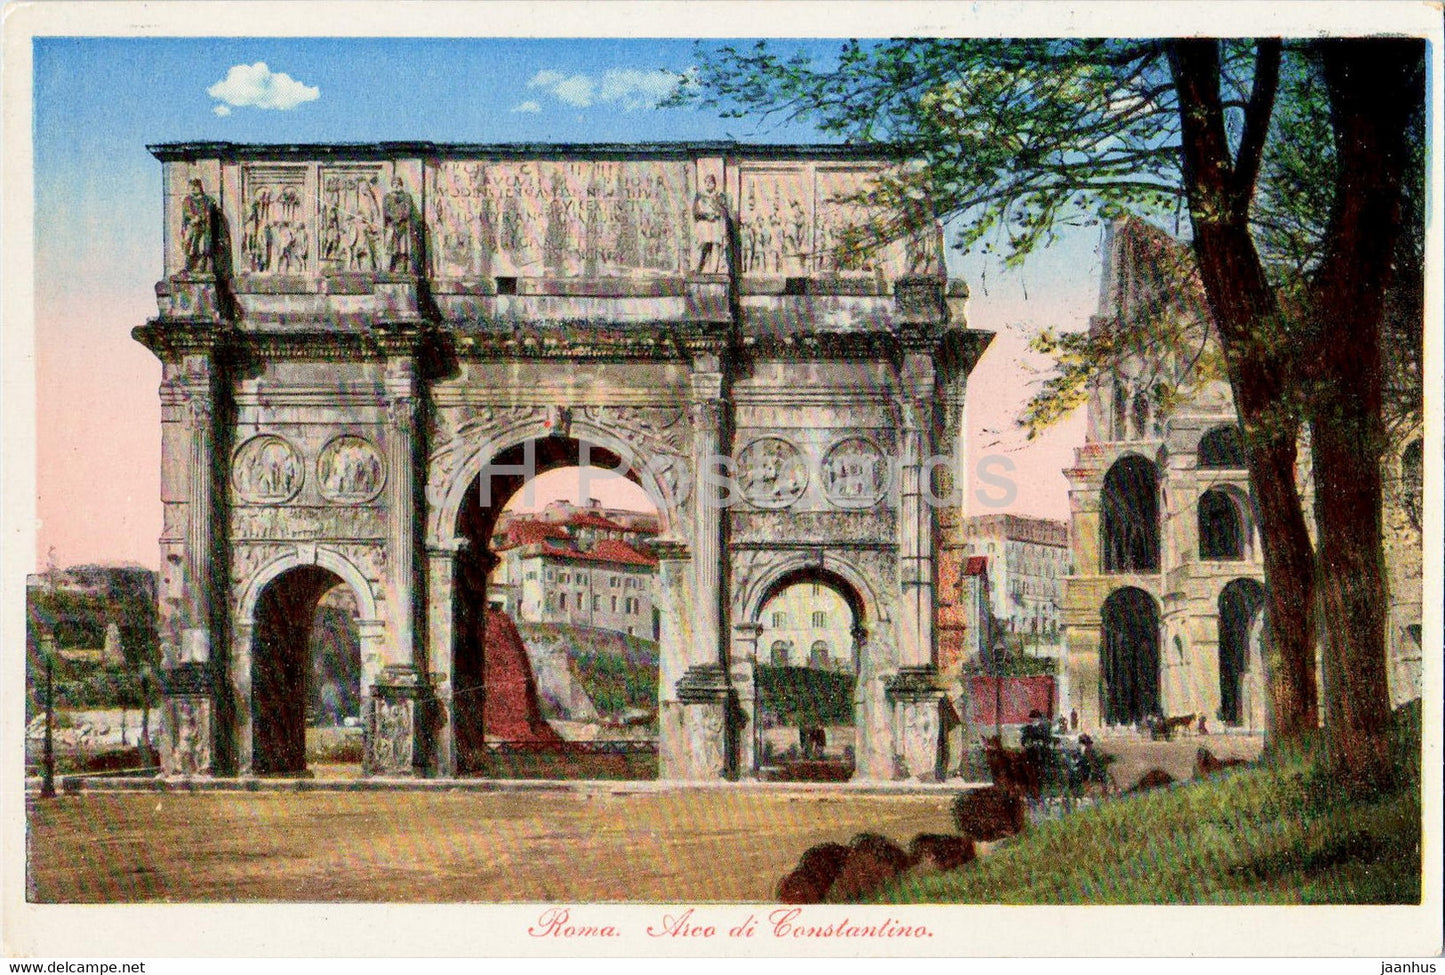 Roma - Rome - Arco di Constantino - Arch of Constantine - ancient world - 5420 - old postcard - Italy - unused - JH Postcards